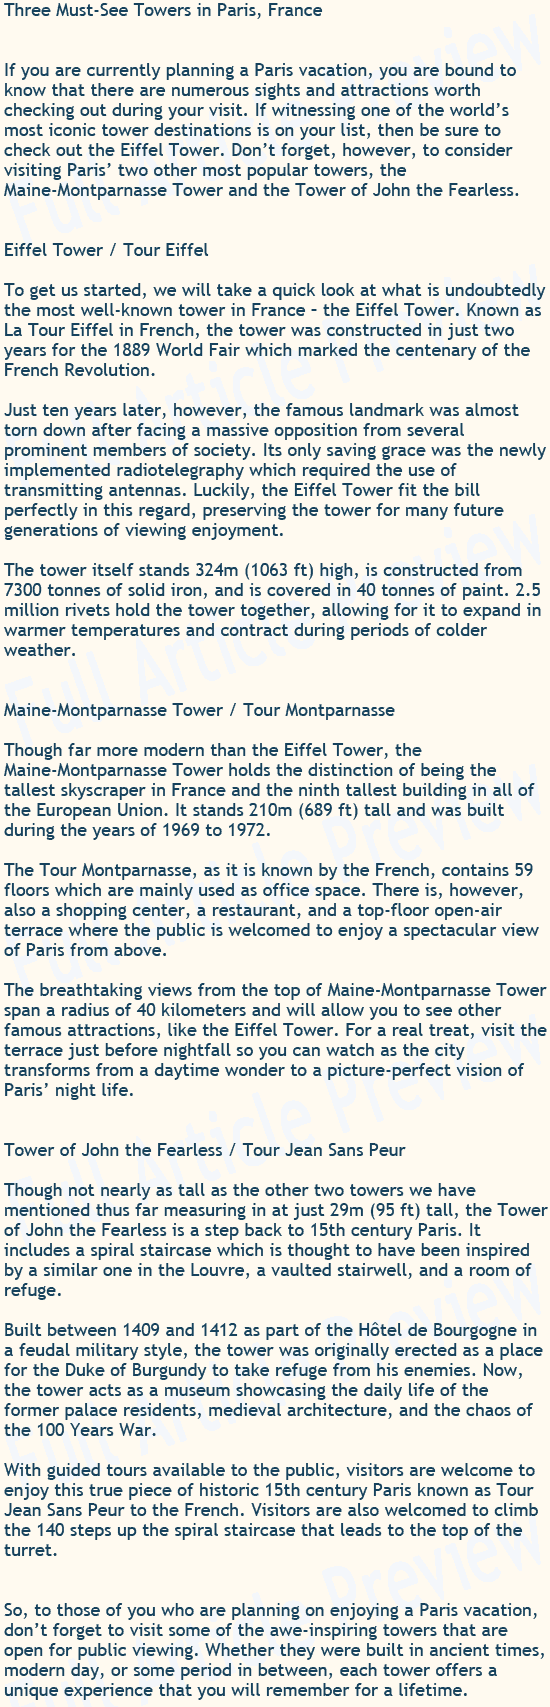 Buy content for blog sites about towers in France.